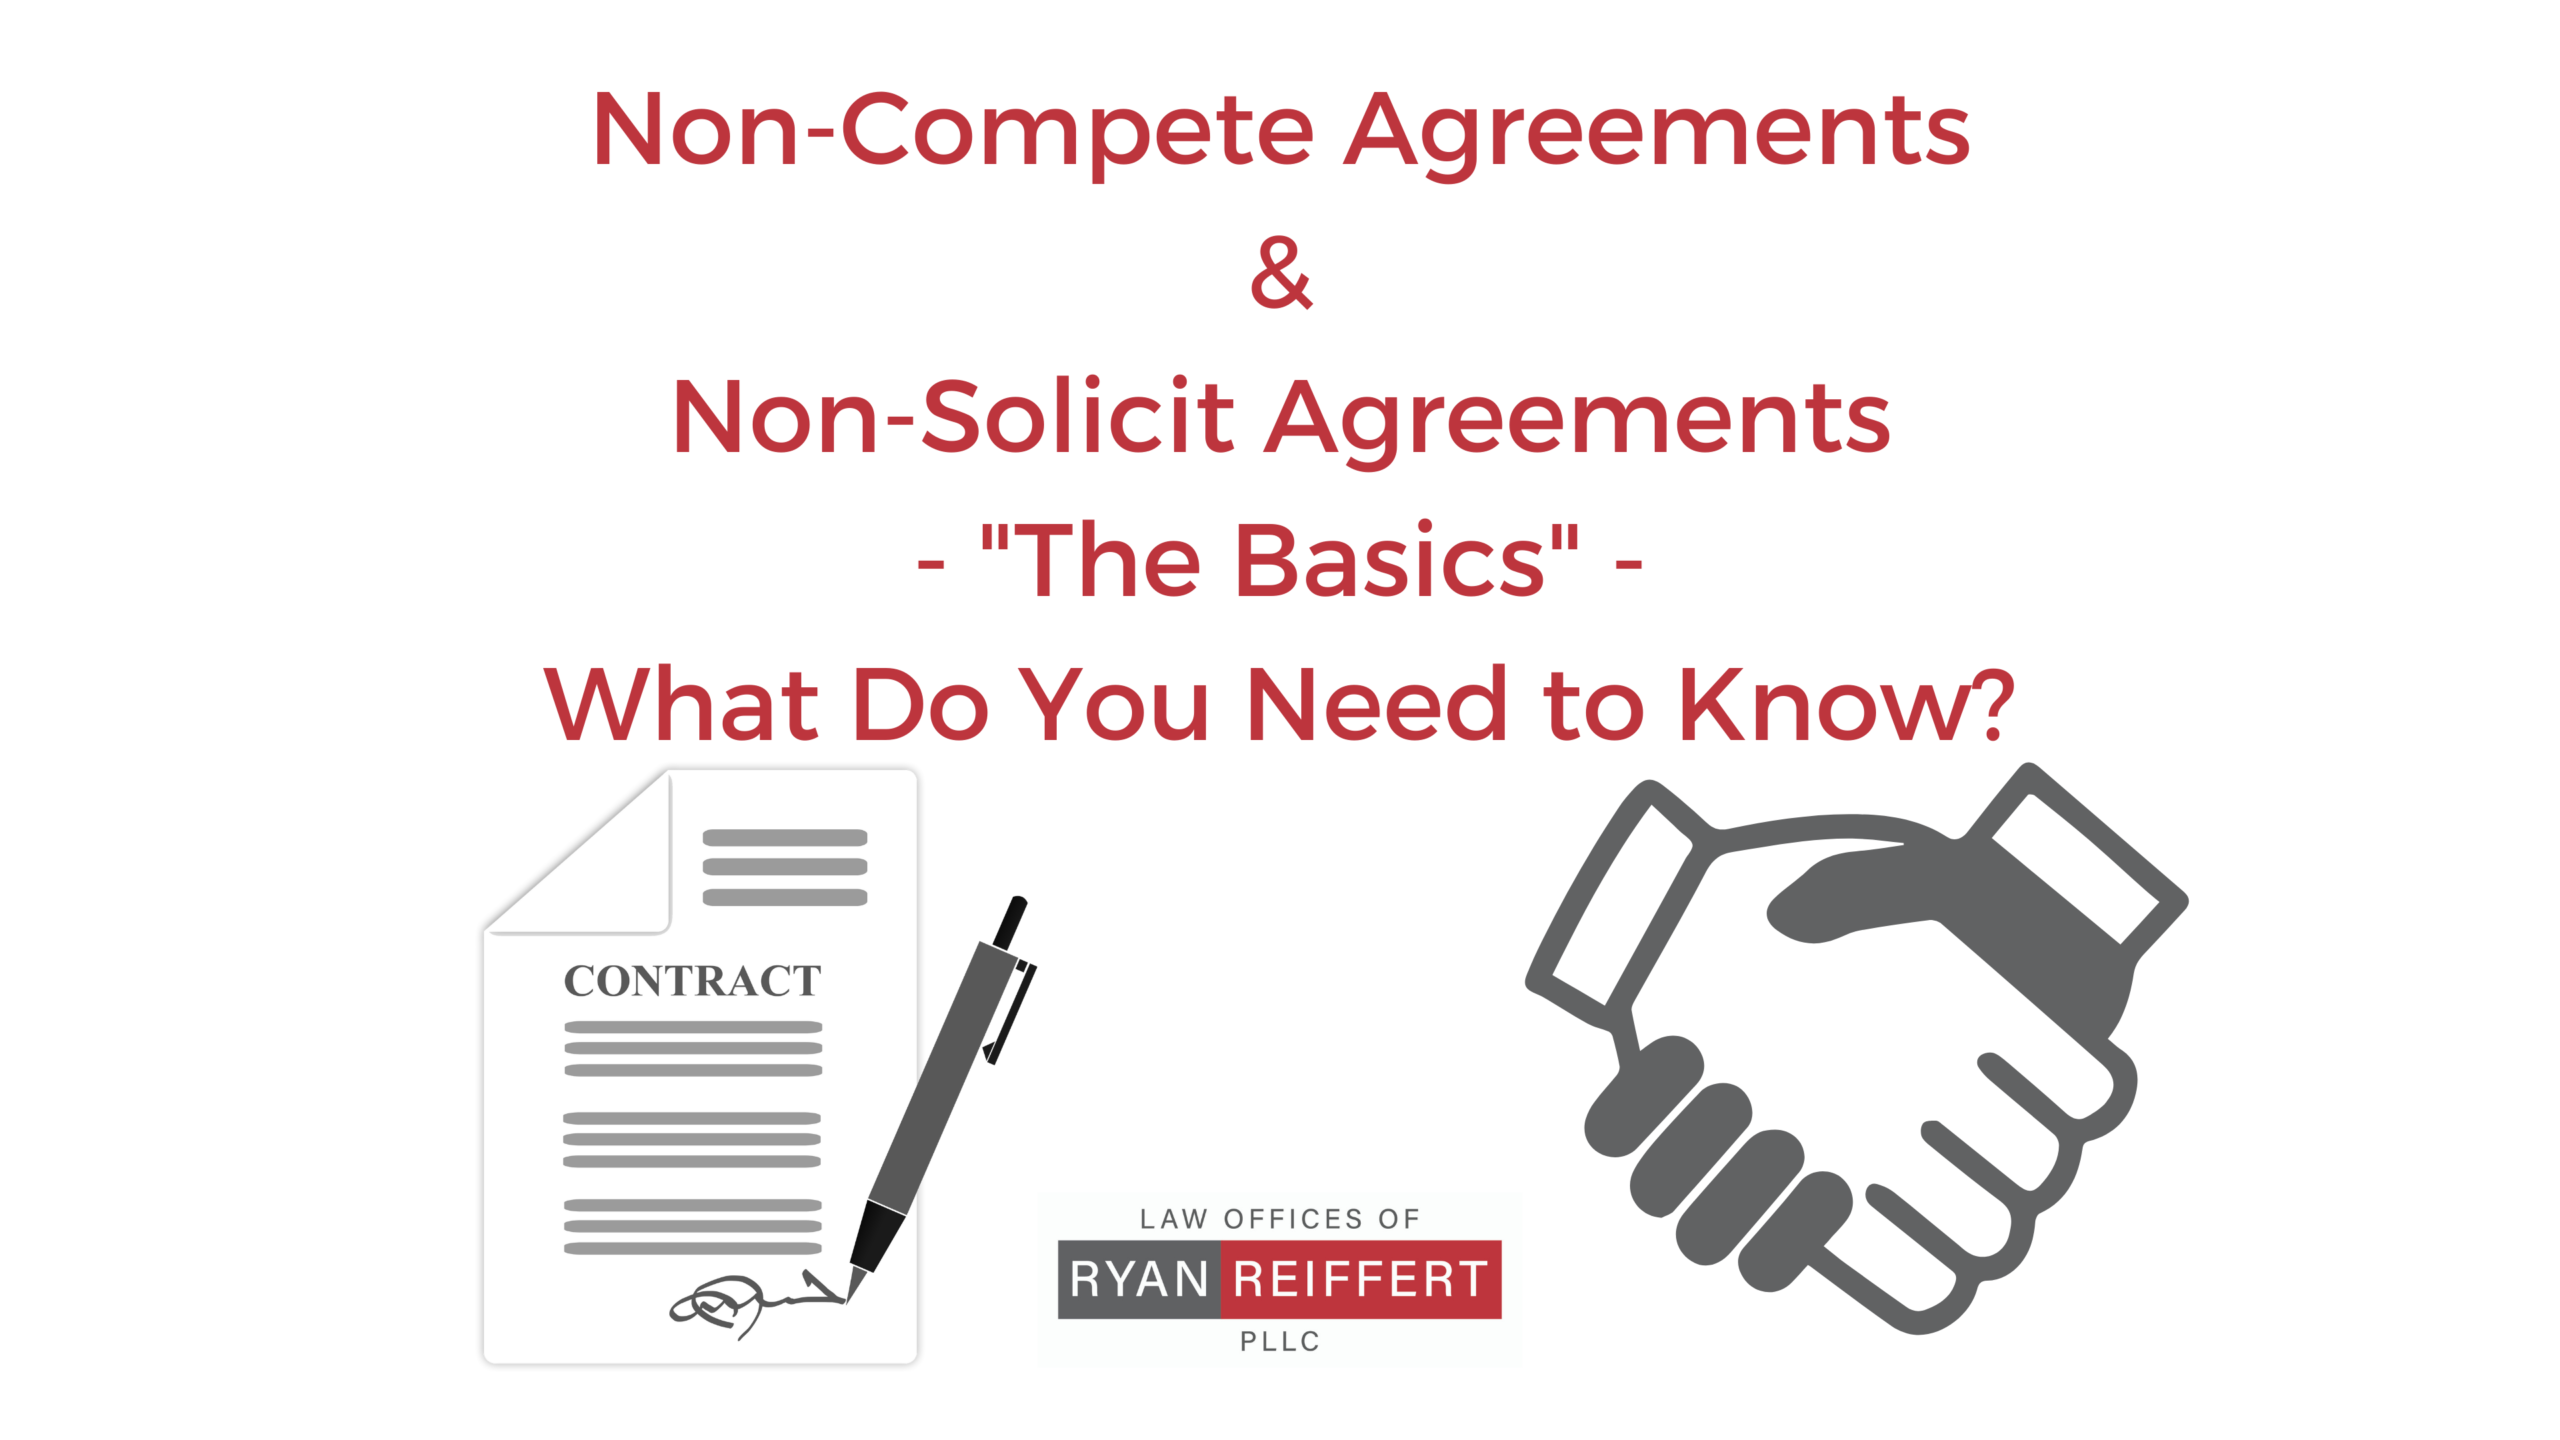 Non-compete agreements & non-solicit Agreements